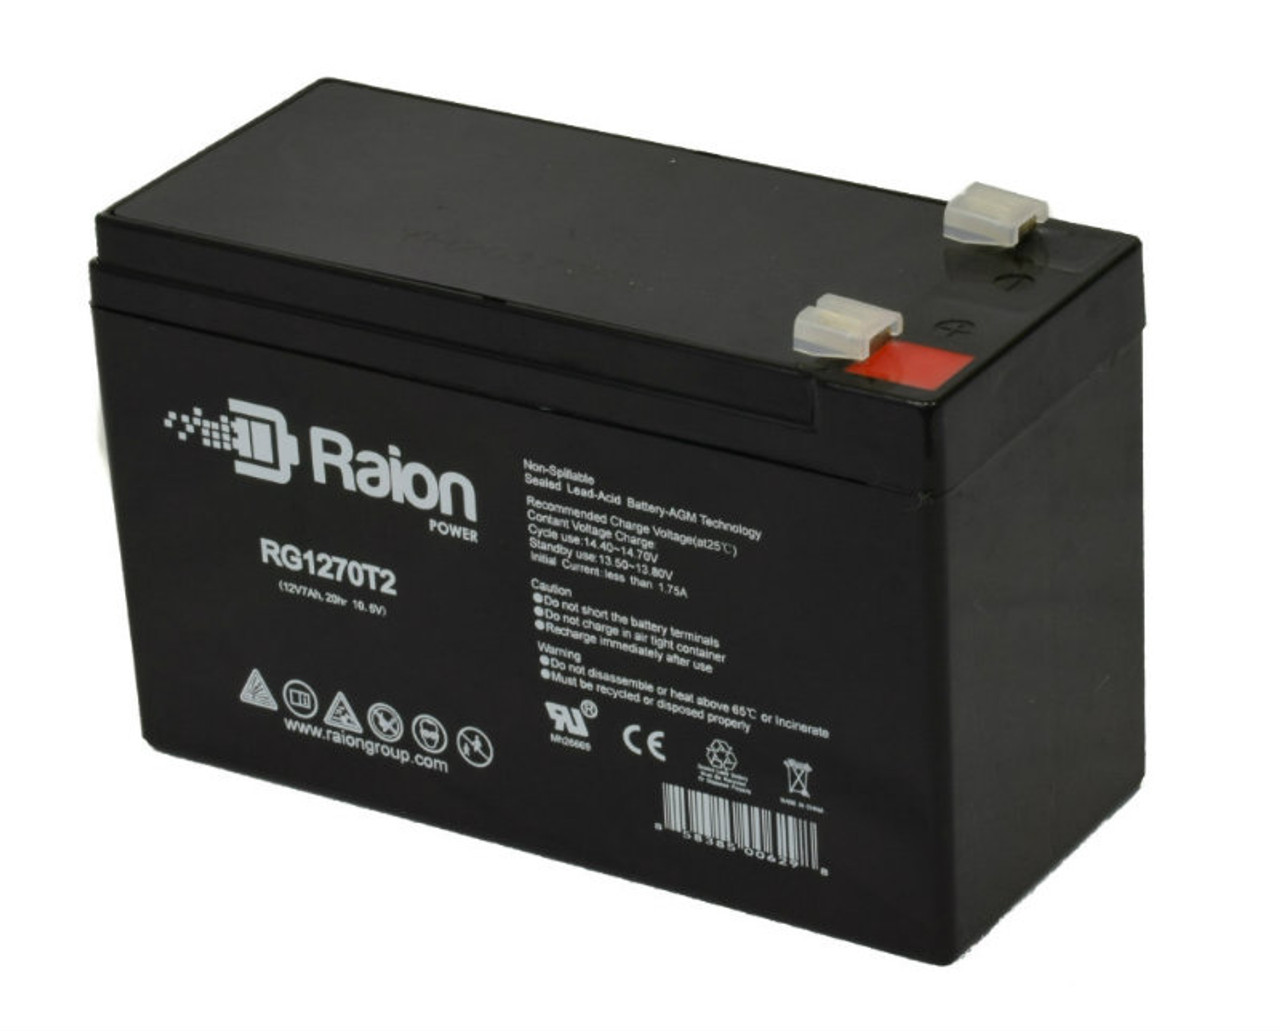 Raion Power RG1270T2 12V 7Ah Rechargeable Battery for Canbat CBL7.2-12